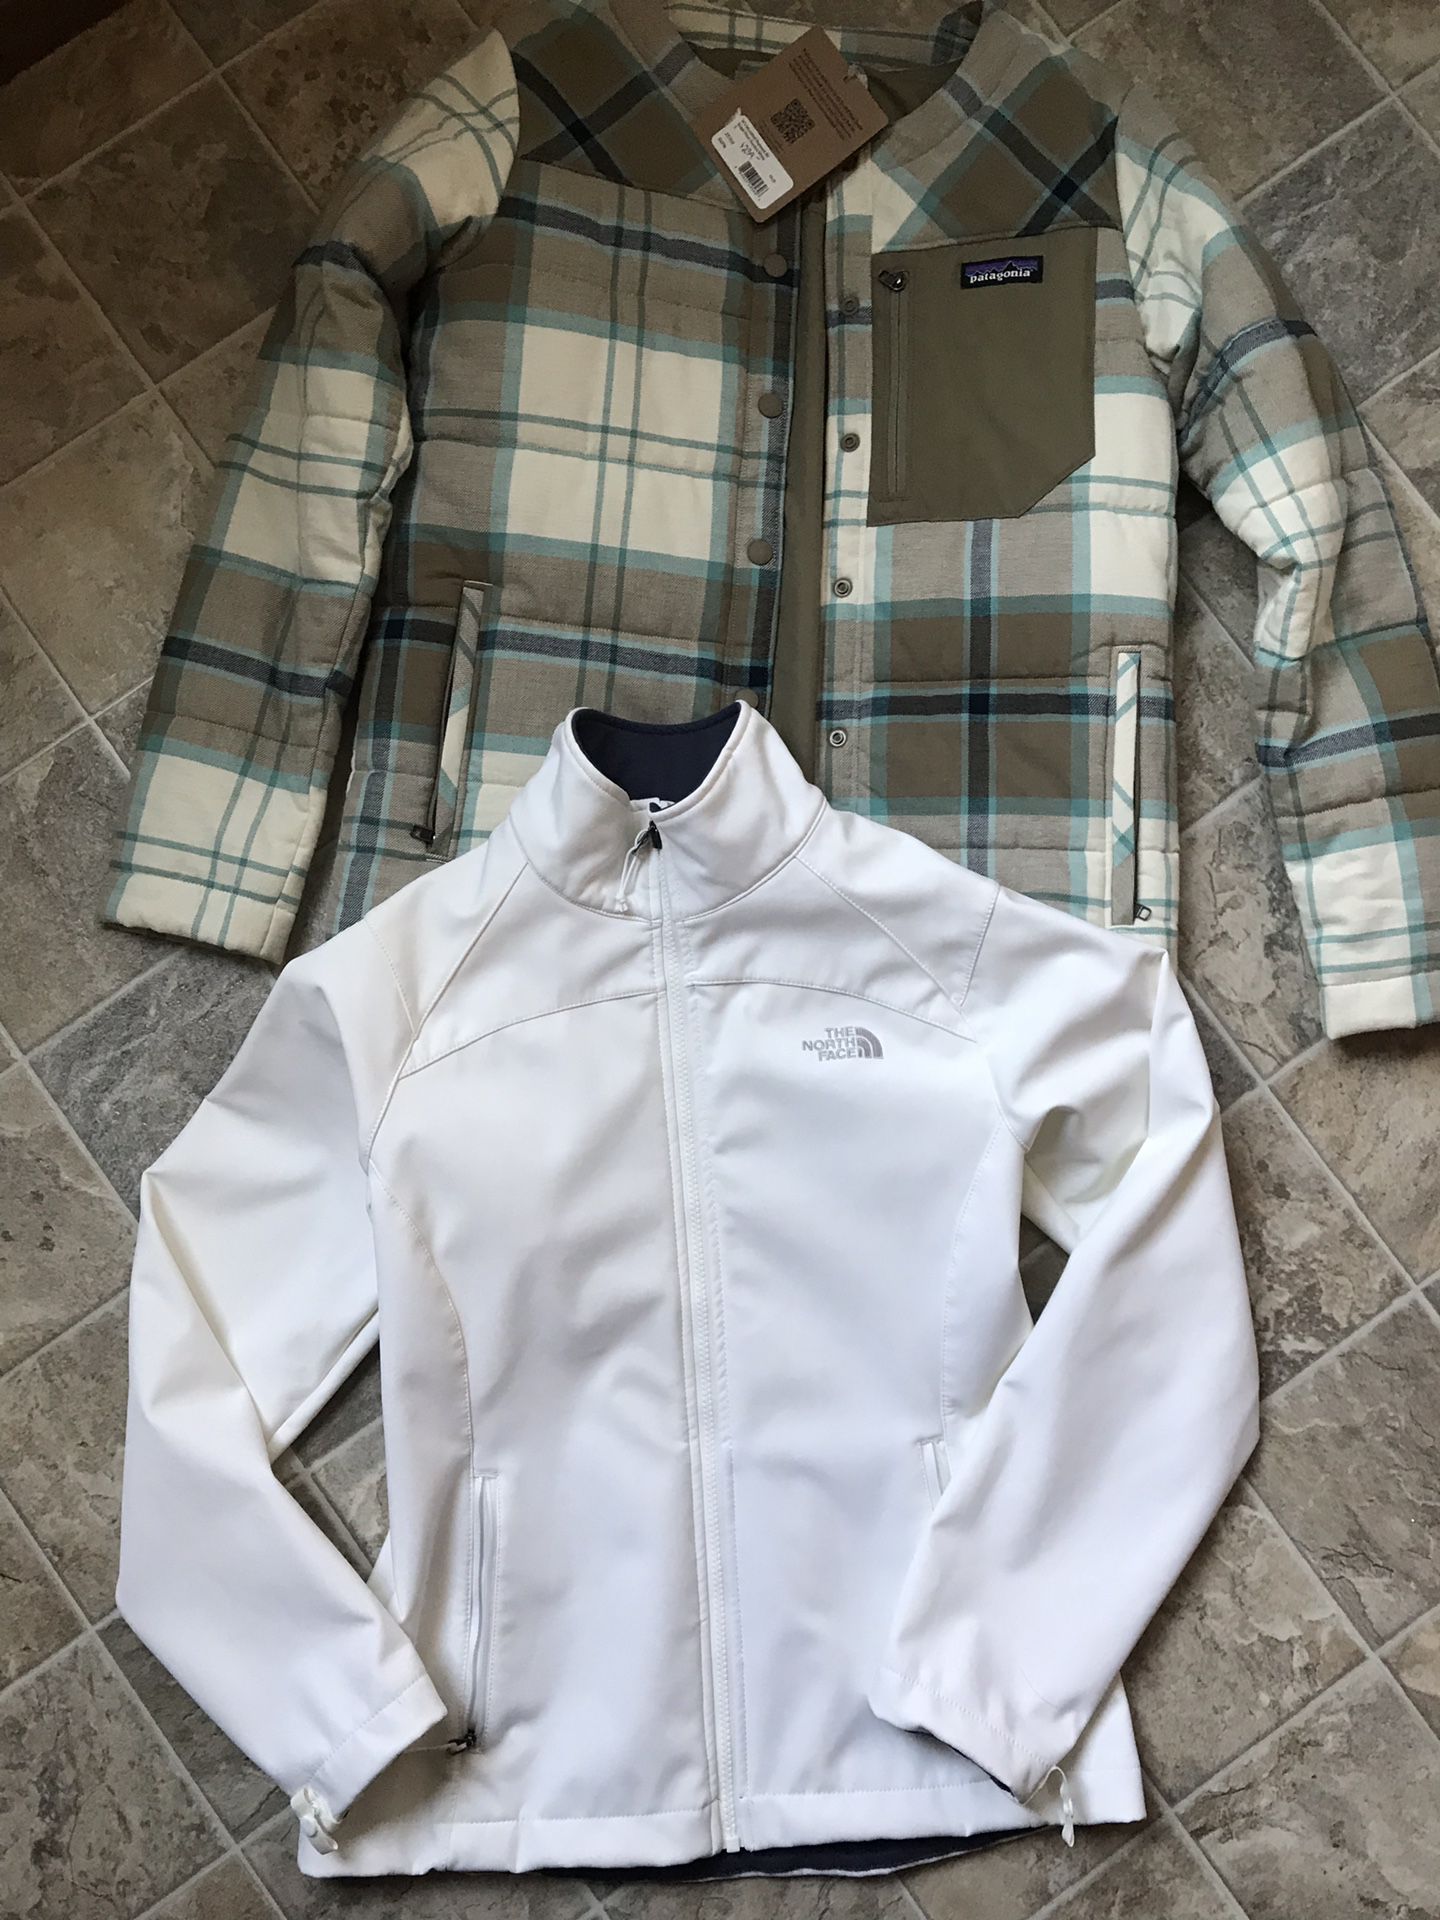 Patagonia and northface set